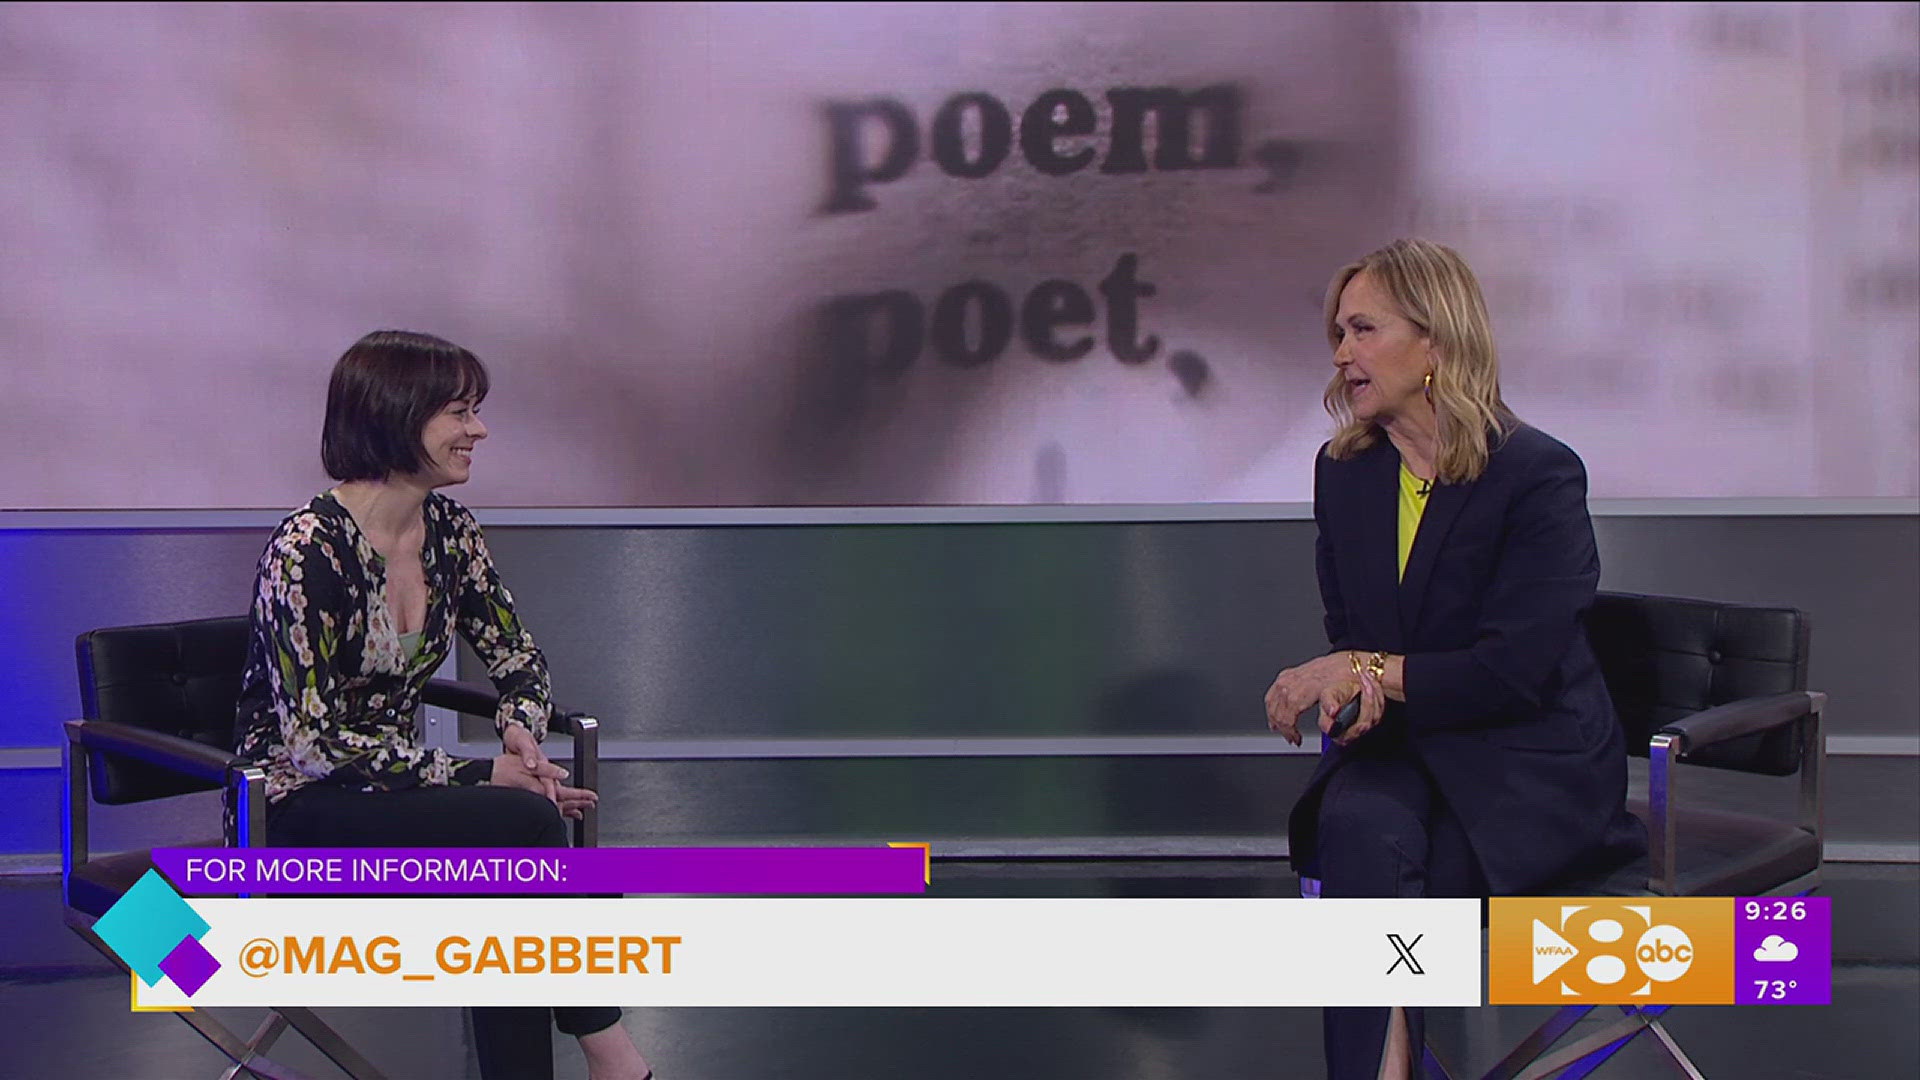 Dr. Mag Gabbert shares why she always wanted to be Dallas' Poet Laureate and her top picks for poetry. Go to @mag_gabbert for more information.